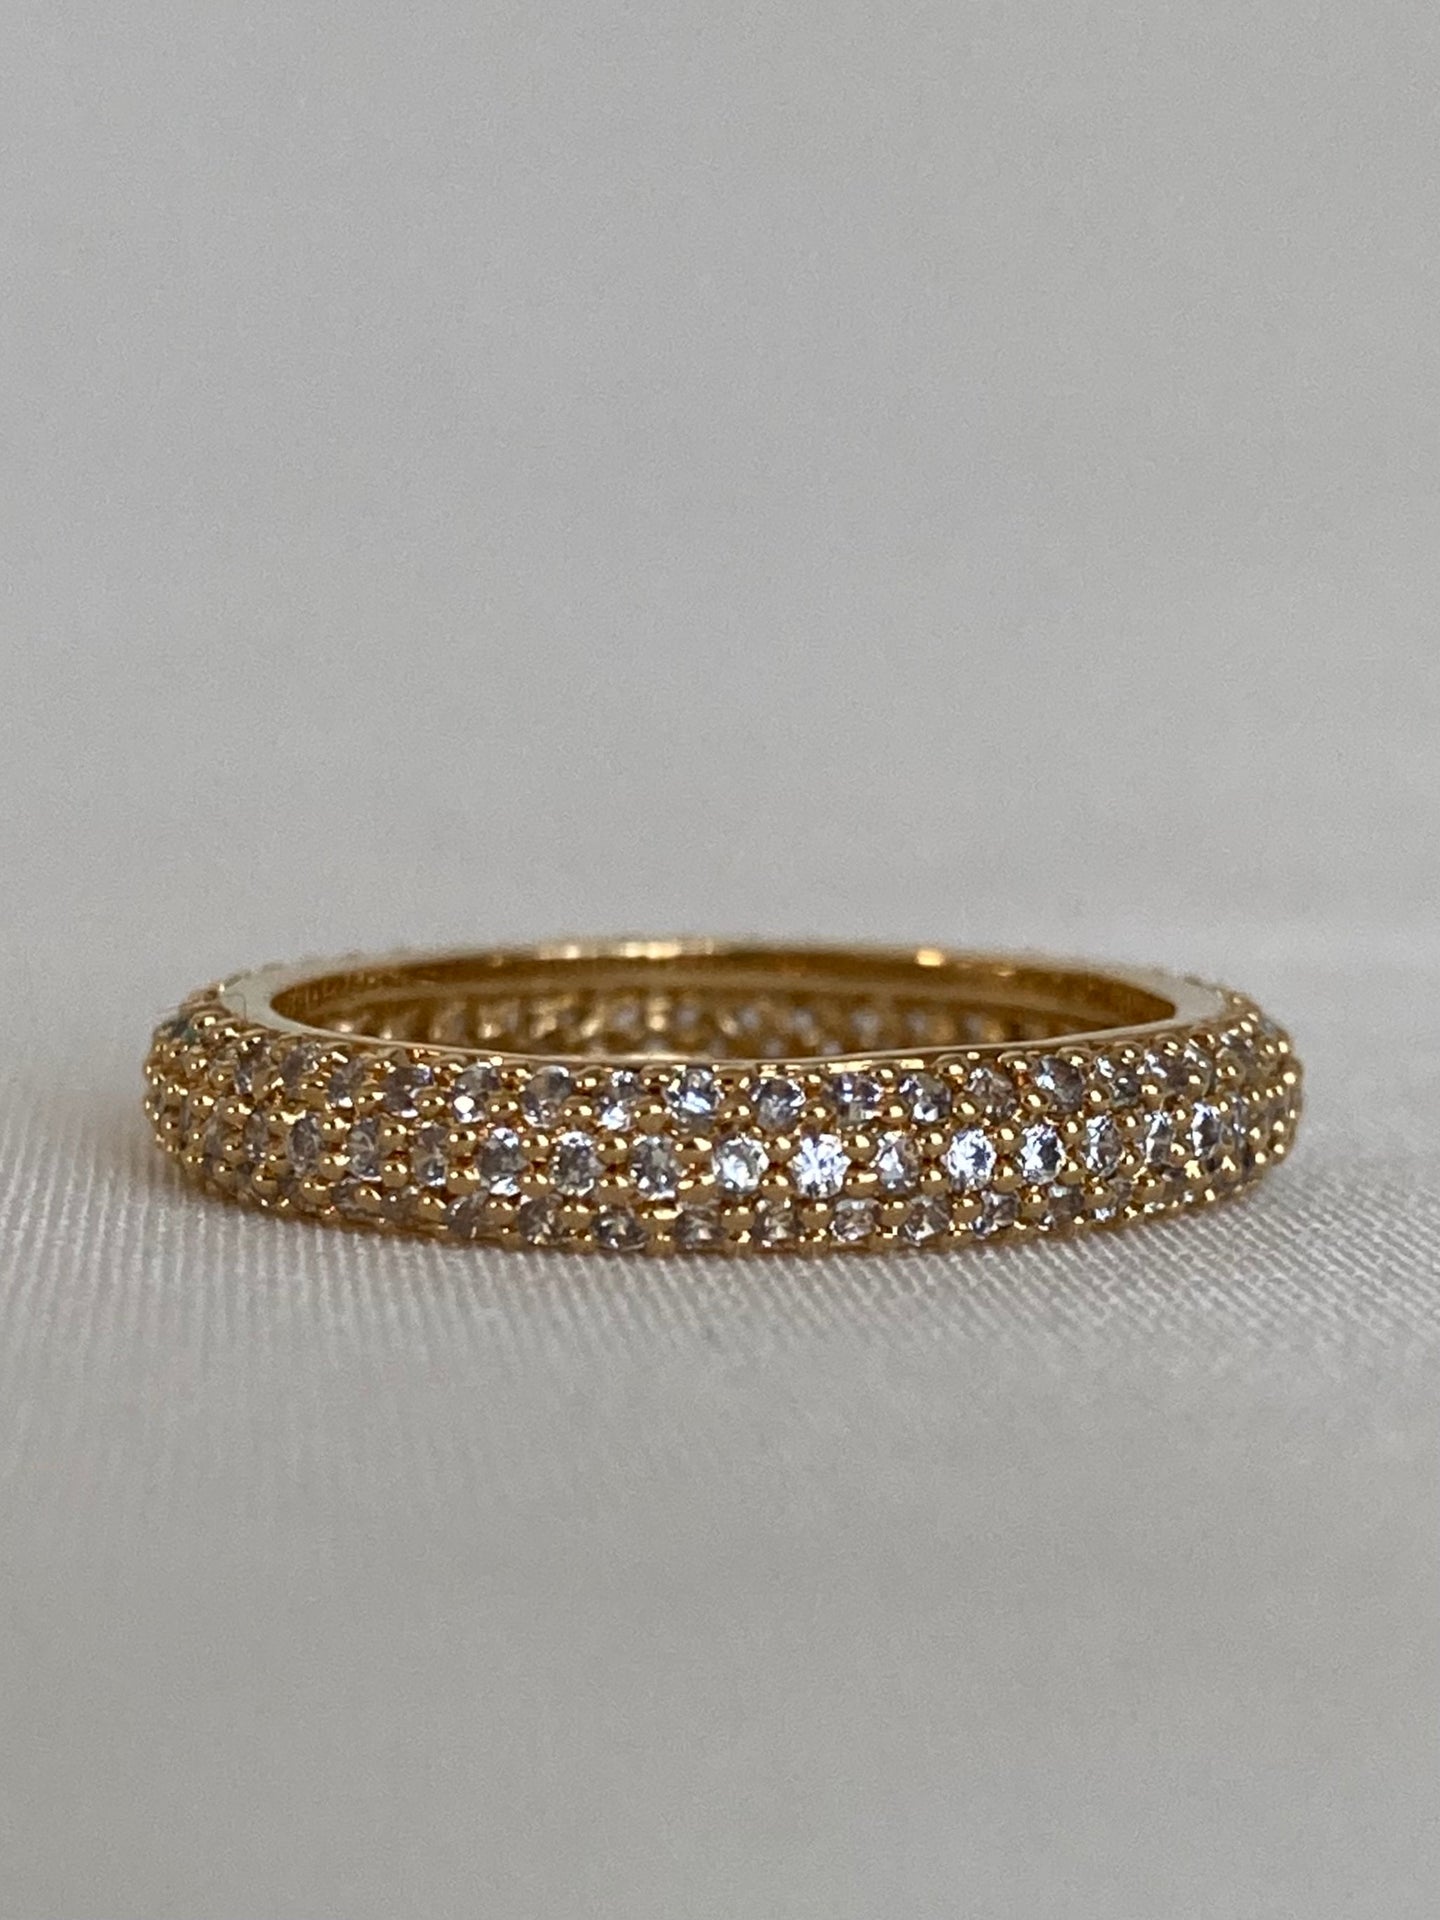 Micro pave ring, micro pave band, micro pave eternity band, micro pave diamond ring, crystal band ring, cz rings that look real, stacking rings diamond, stacking rings gold, layering rings gold, dainty rings gold, vanessa mooney SABRINA RING